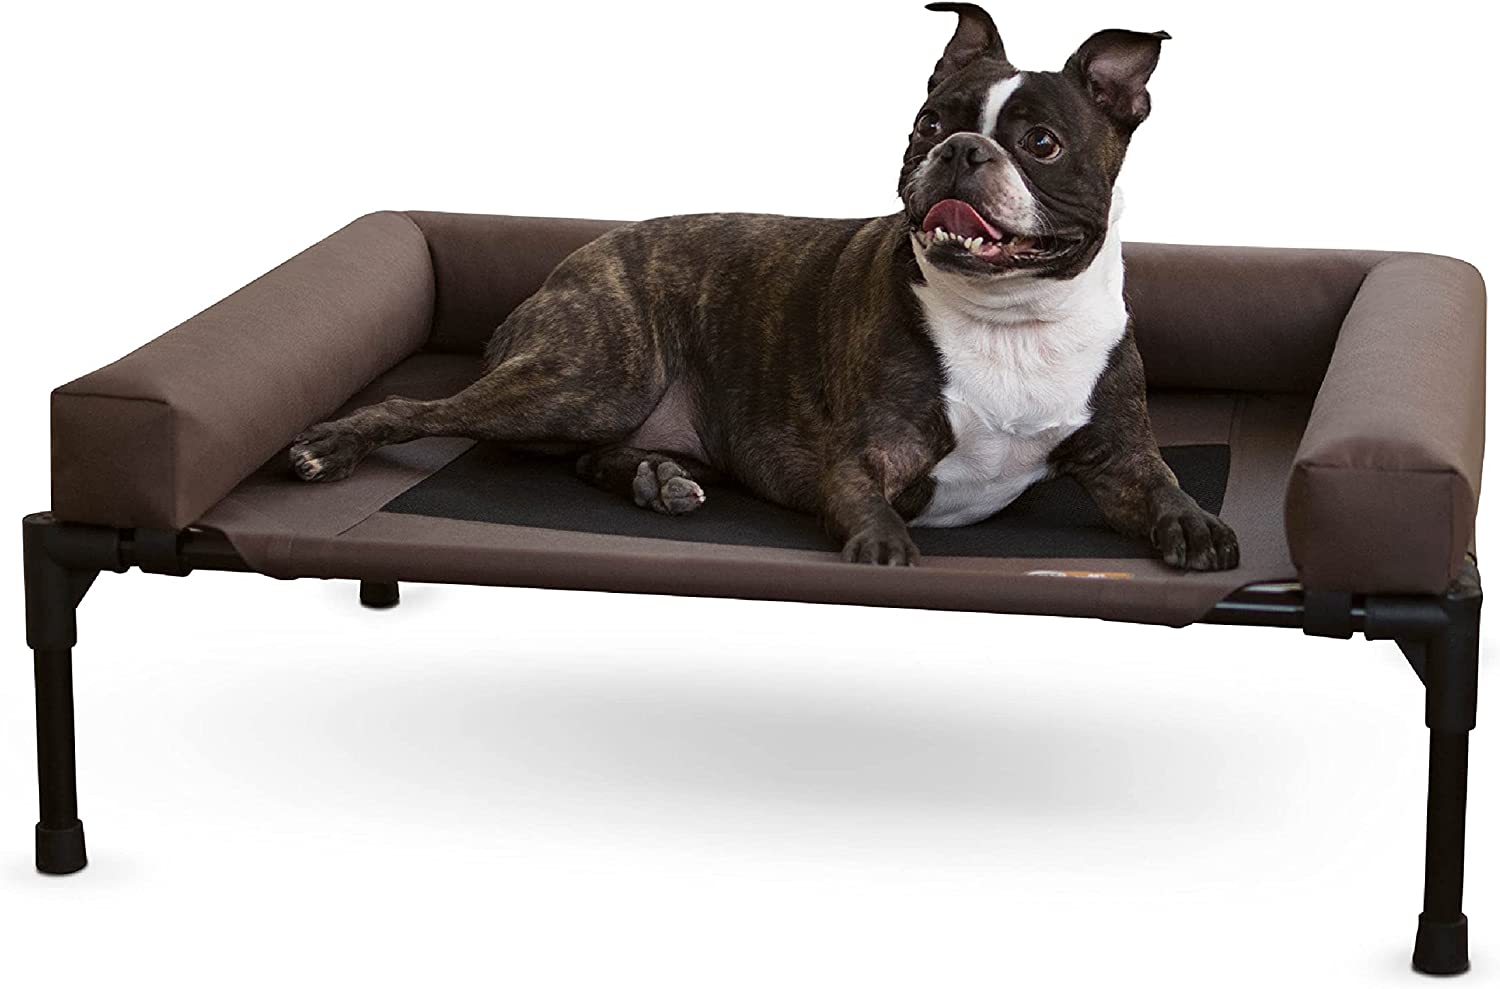 7. K&H Pet Products Bolster Hondenmand